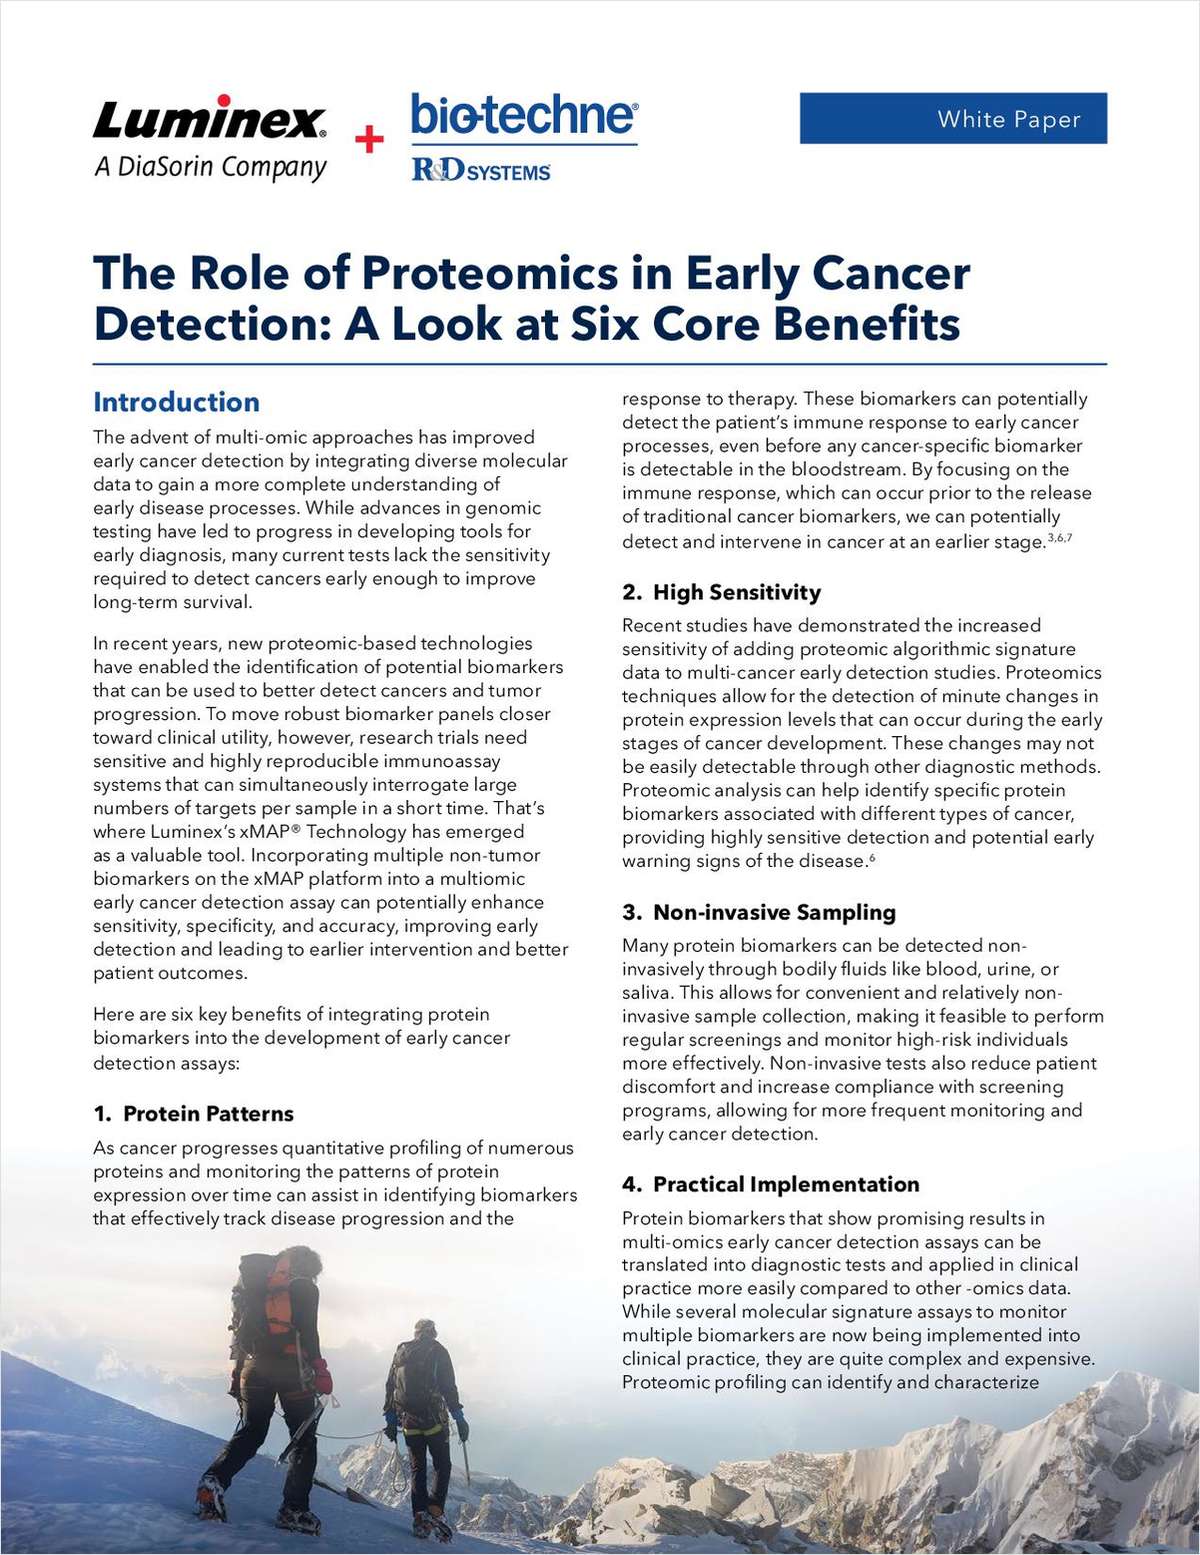 The Role of Proteomics in Early Cancer Detection: A Look at Six Core Benefits